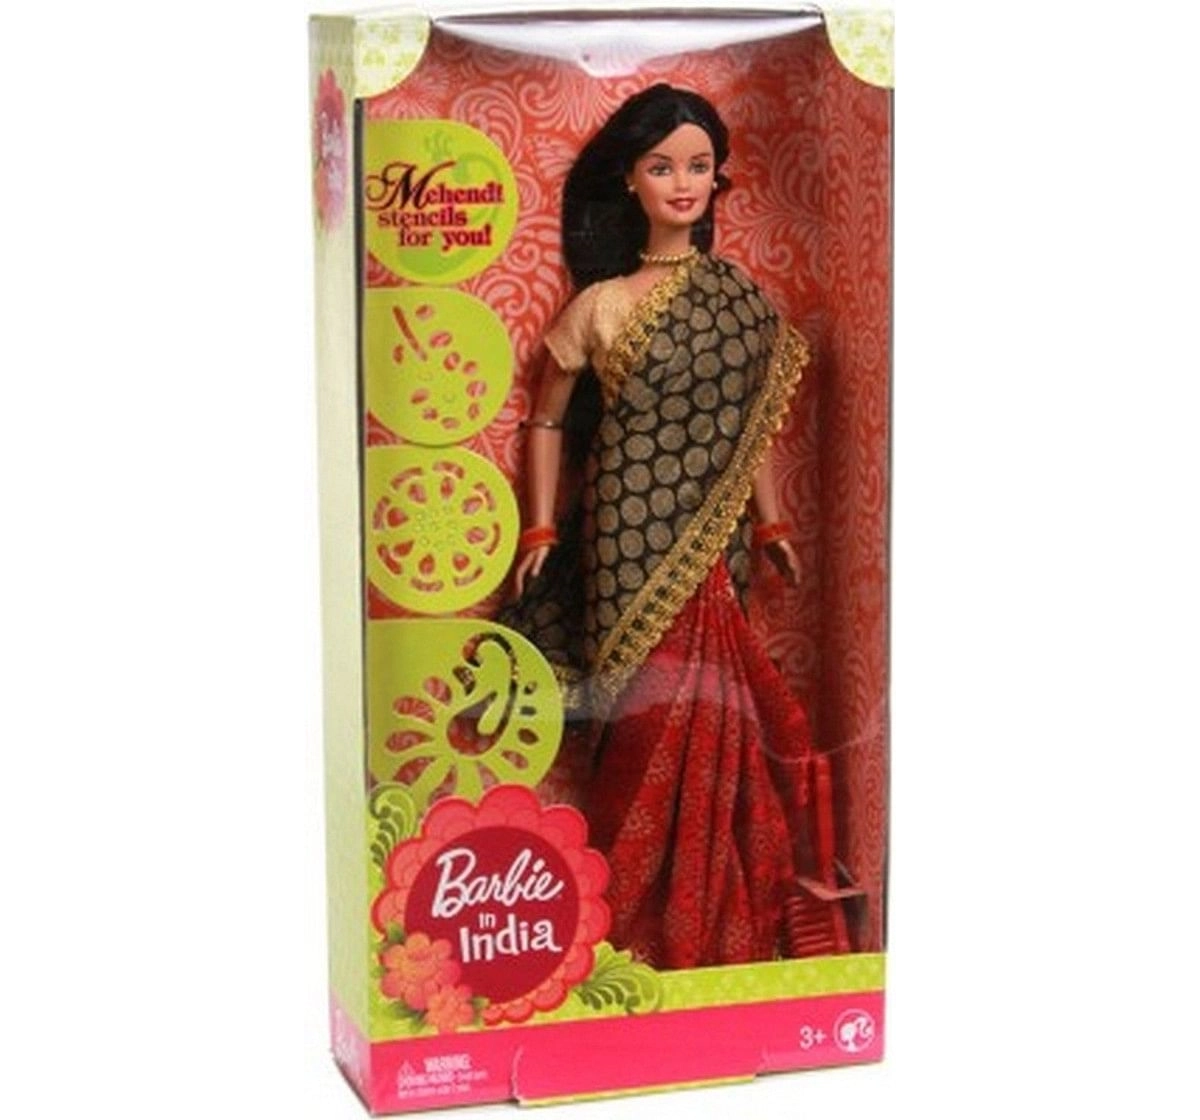 Barbie in India in New Look, New Brocade & Silk Sari Dolls & Accessories for Kids age 3Y+, Assorted